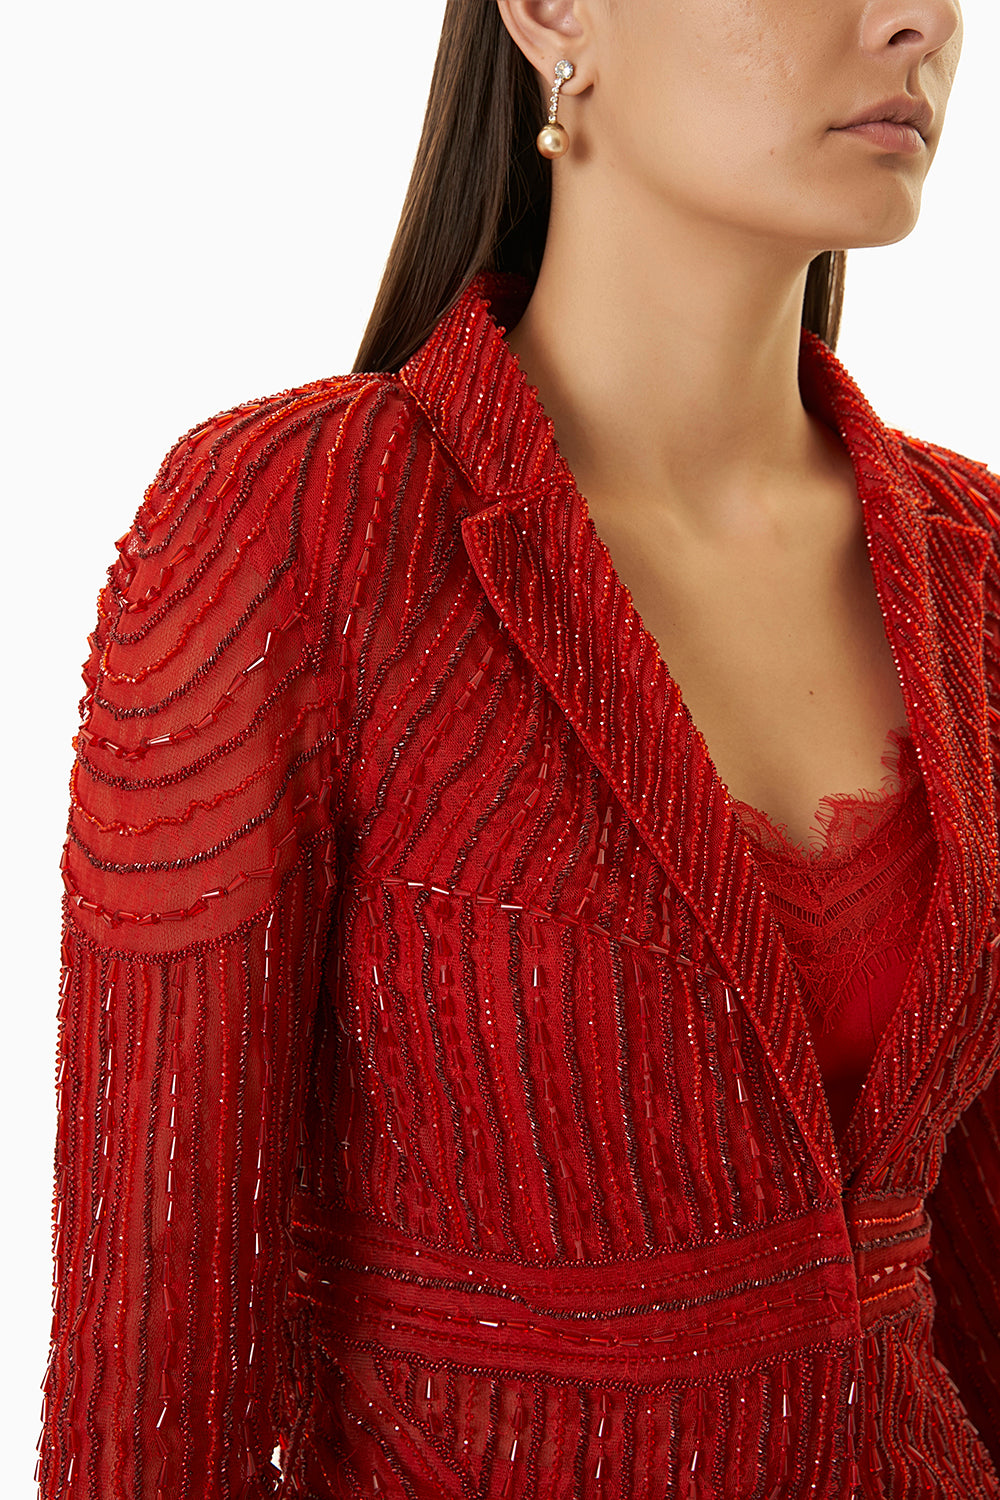 Red Embellished Jacket With Silk Camisole And Pants